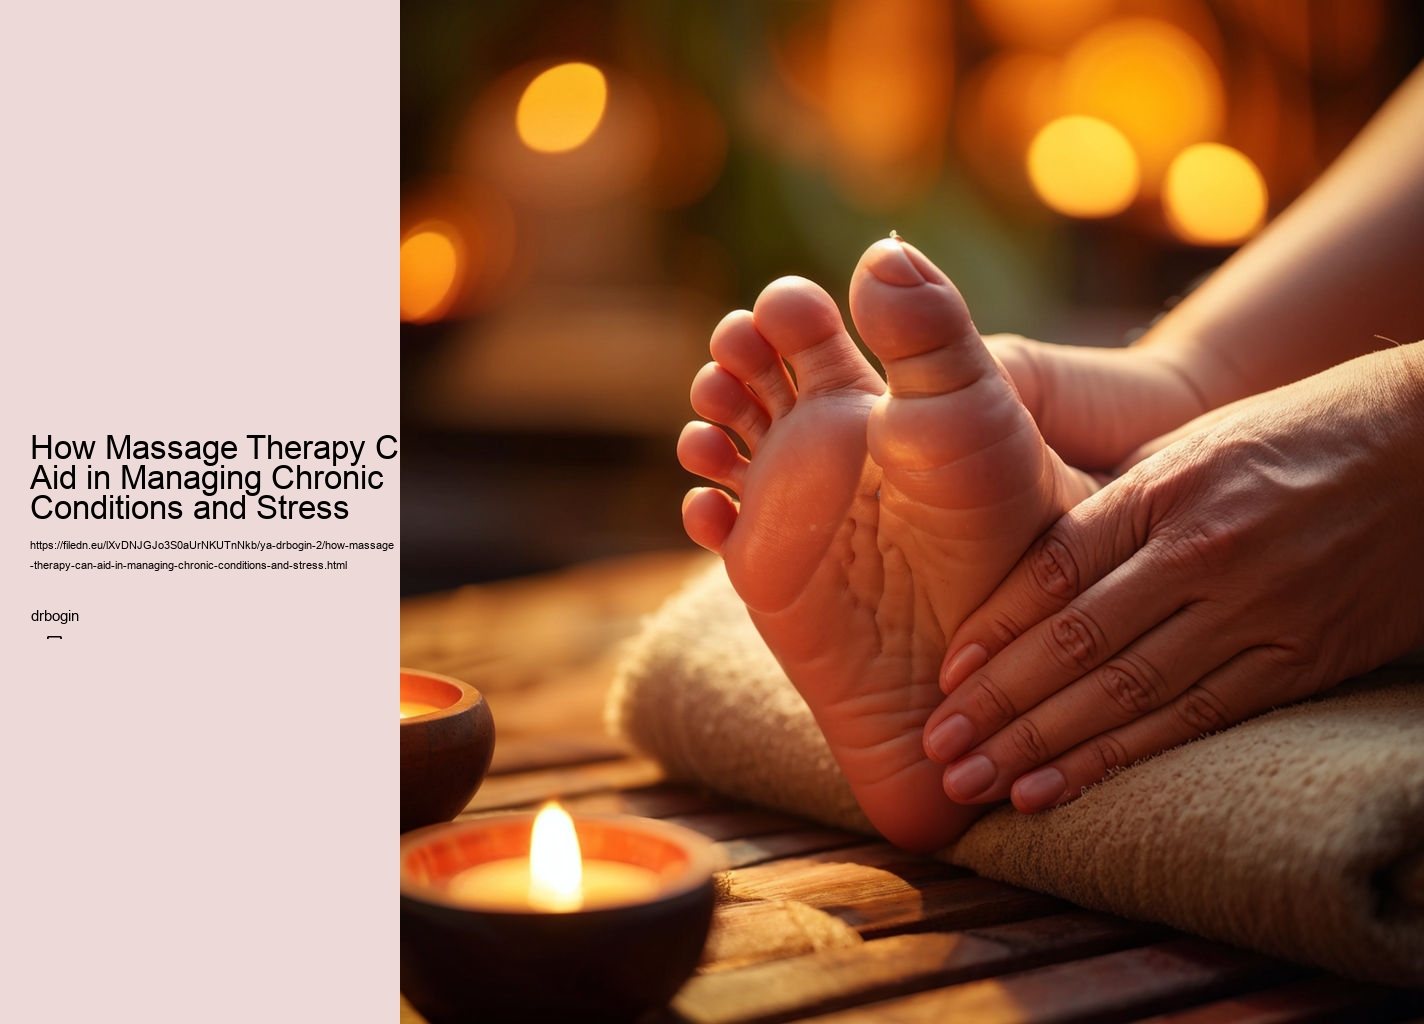 How Massage Therapy Can Aid in Managing Chronic Conditions and Stress